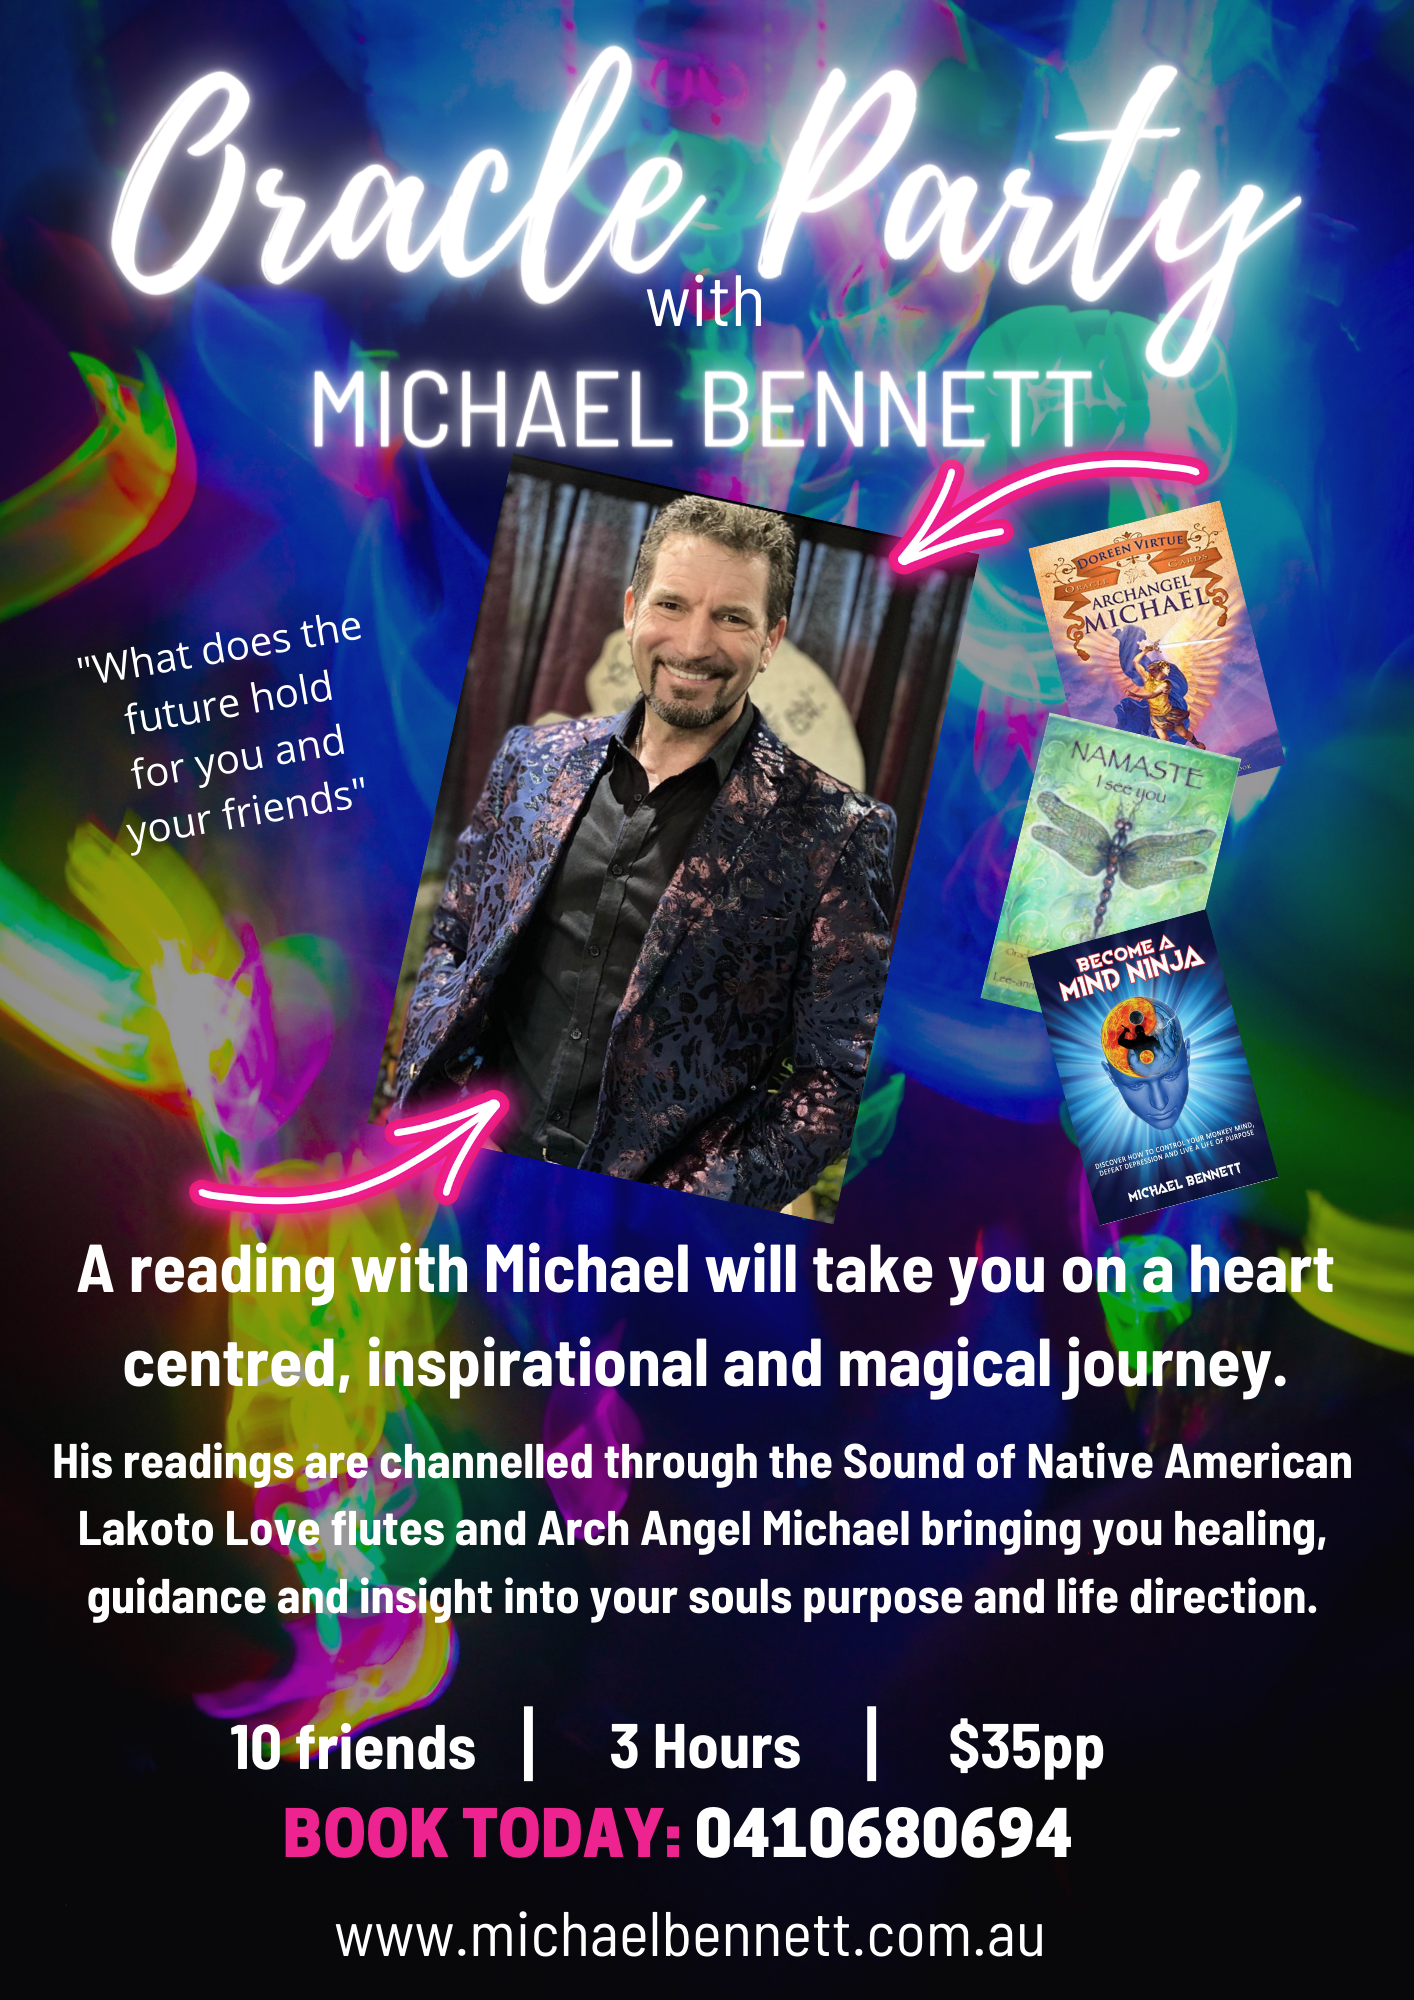 Michaels readings are channelled through the sound of the Native American Lakota Love Flute and Arch Angel Michael bringing you healing, guidance and an insight into your souls purpose and life direction. 